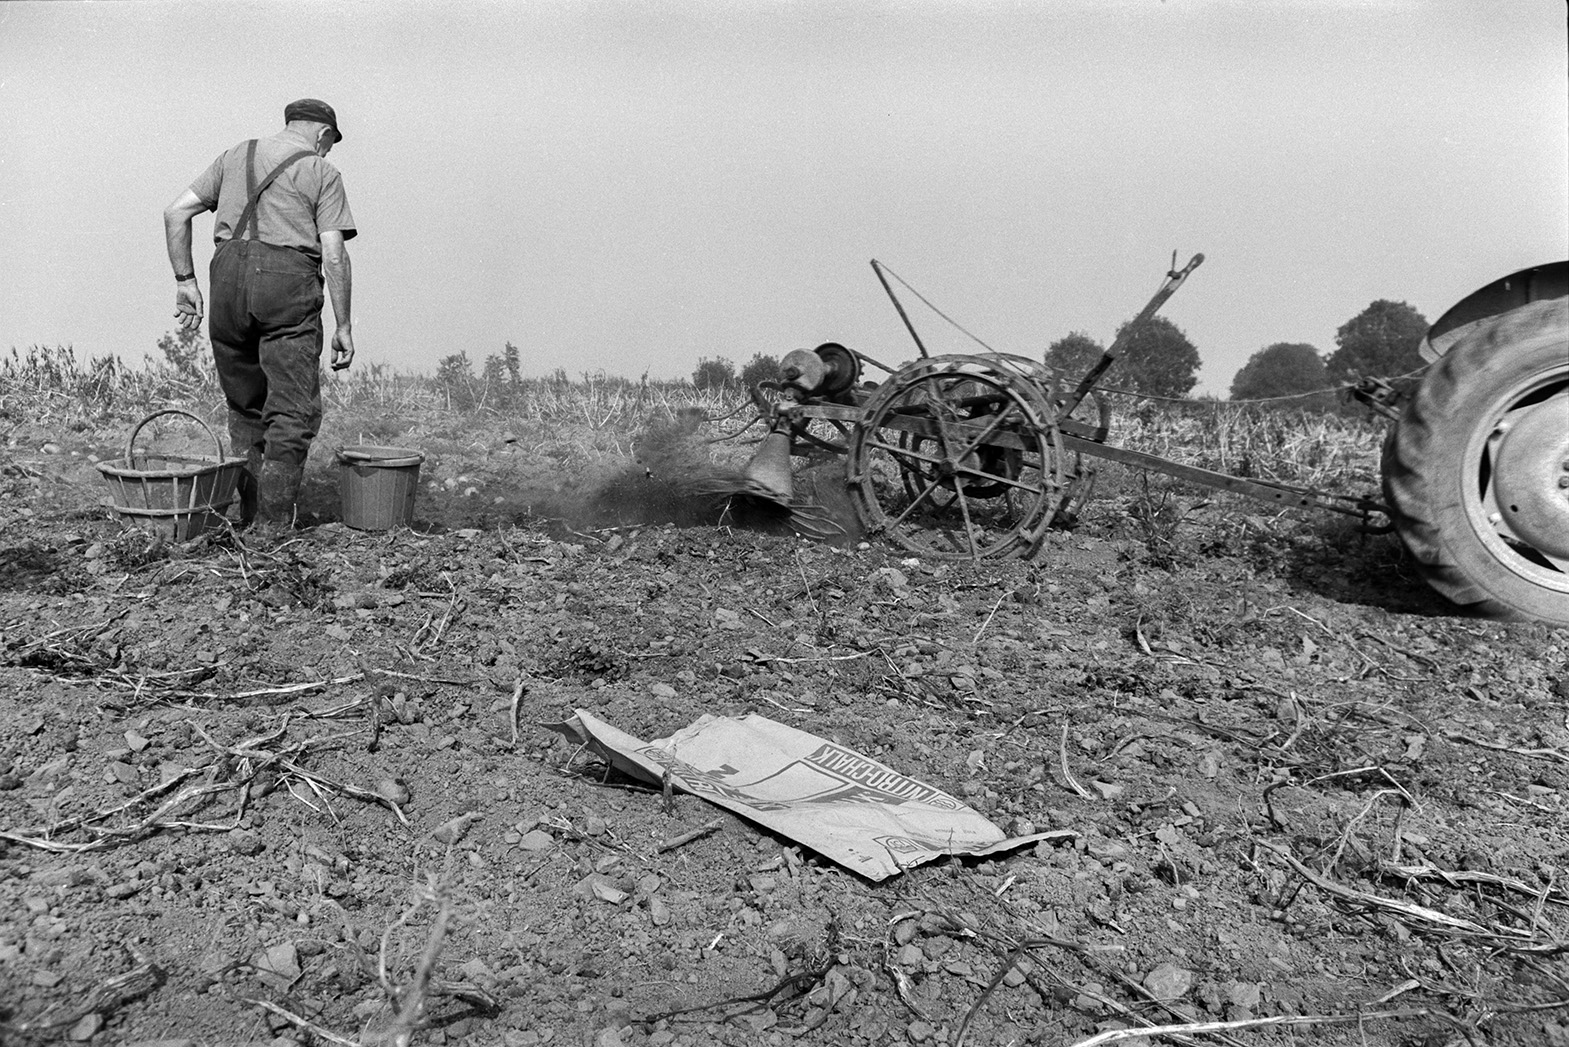 A man watching a machine unearthing potatoes in a field at Mill Road Farm, Beaford. He is going to pick the potatoes out of the soil by hand and place them into a trug or sack. The farm was also known as Jeffrys.